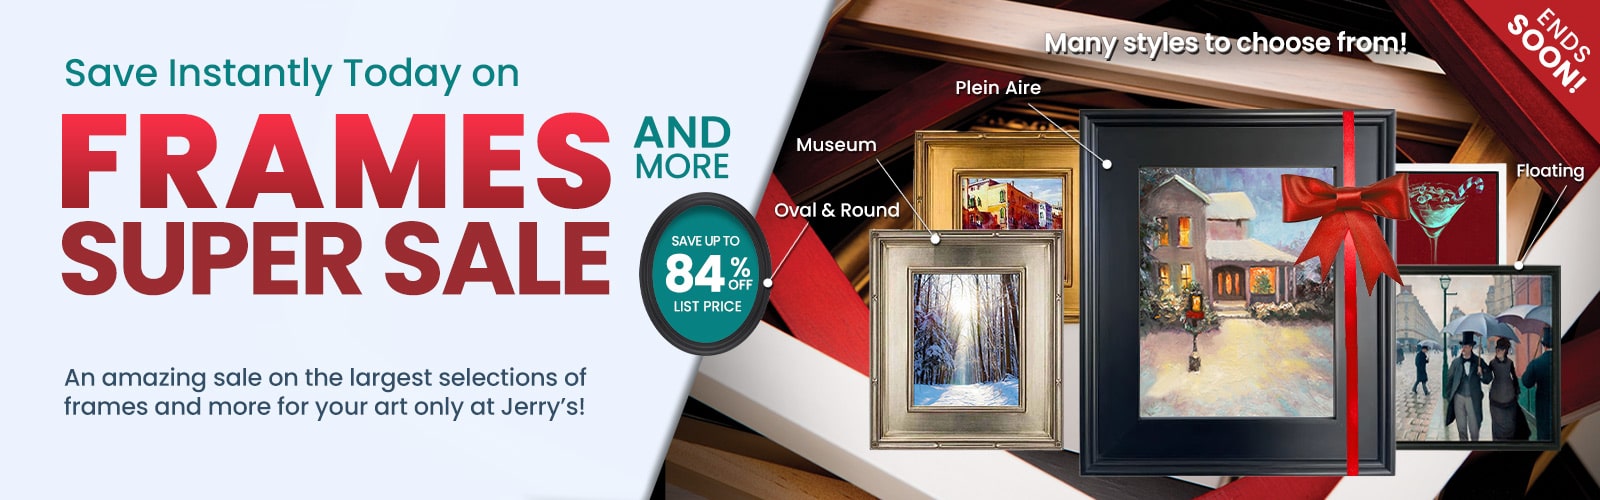 Save Instantly Today on FRAMES and More Super Sale